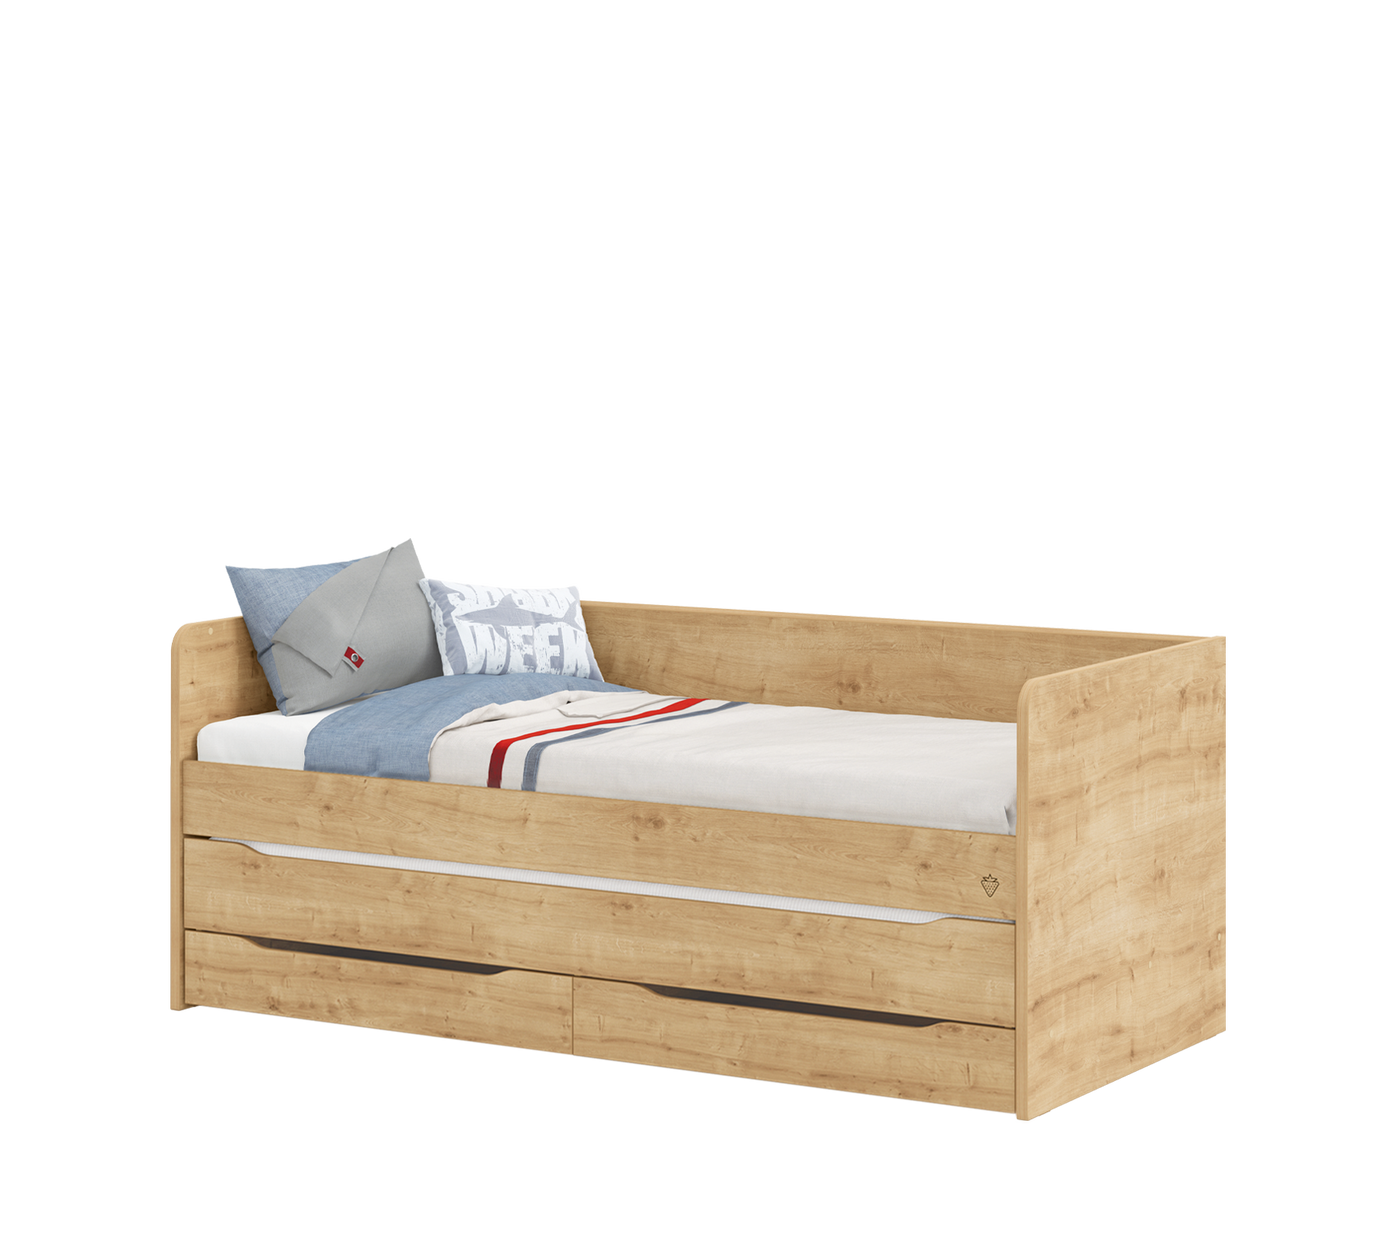 Mocha Studio Drawer Pull-out Bed (90x200 cm)